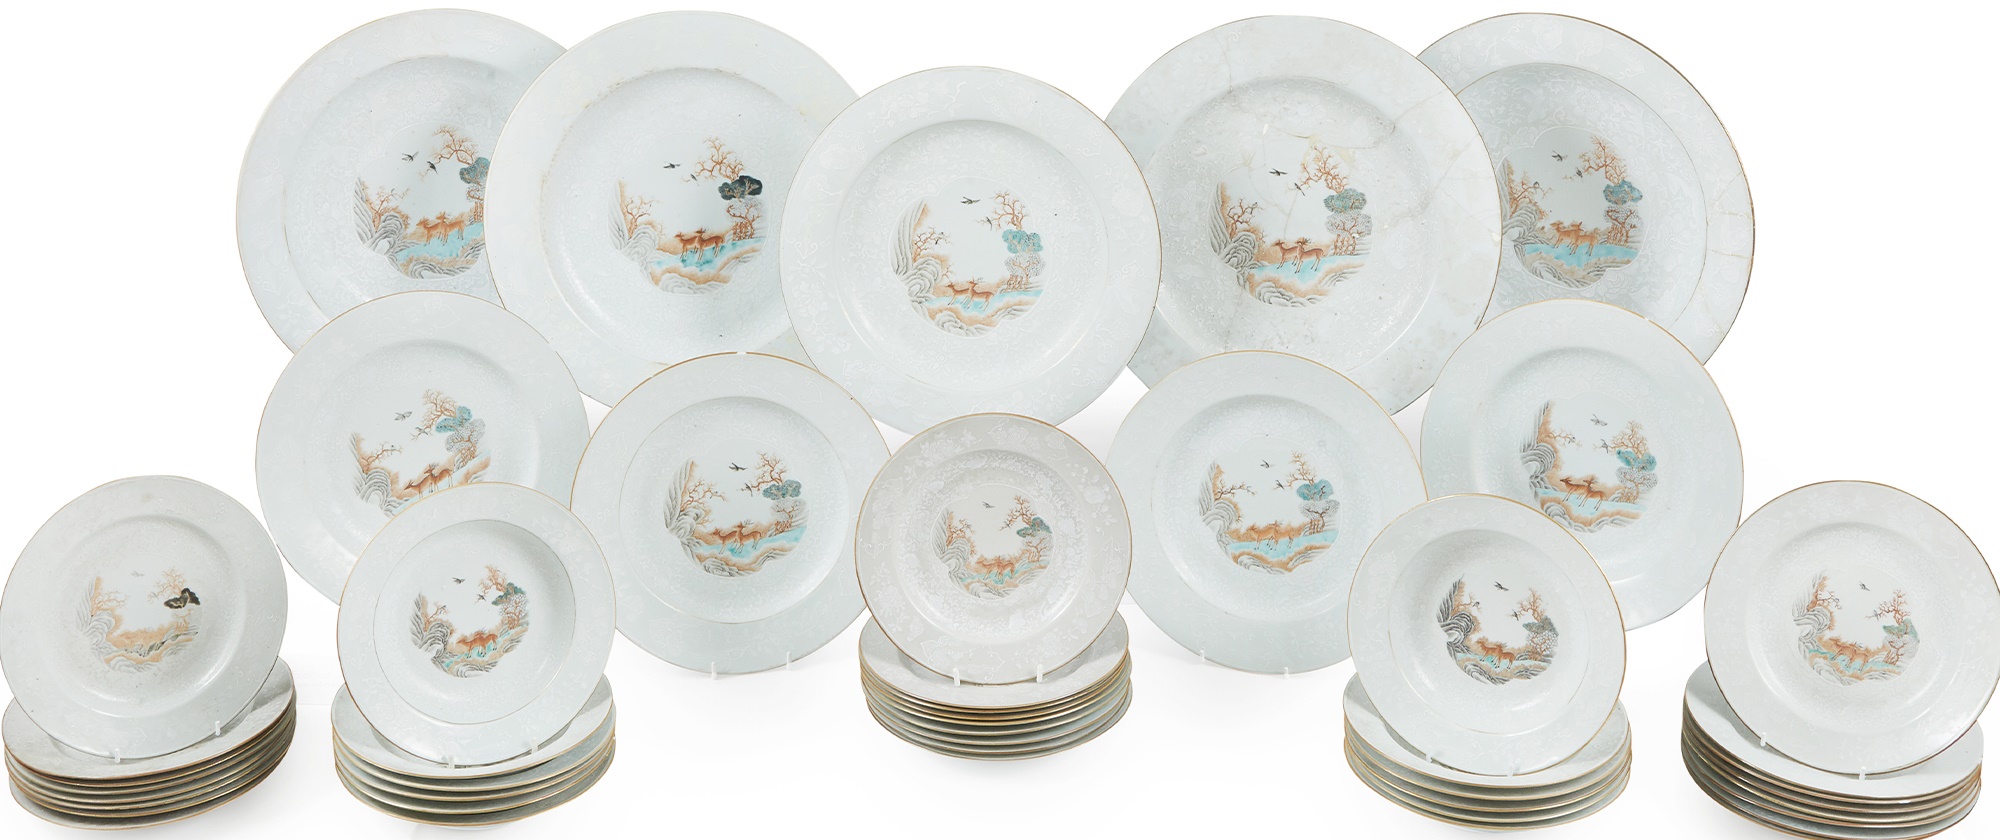 Qing Dynasty Dinner Service